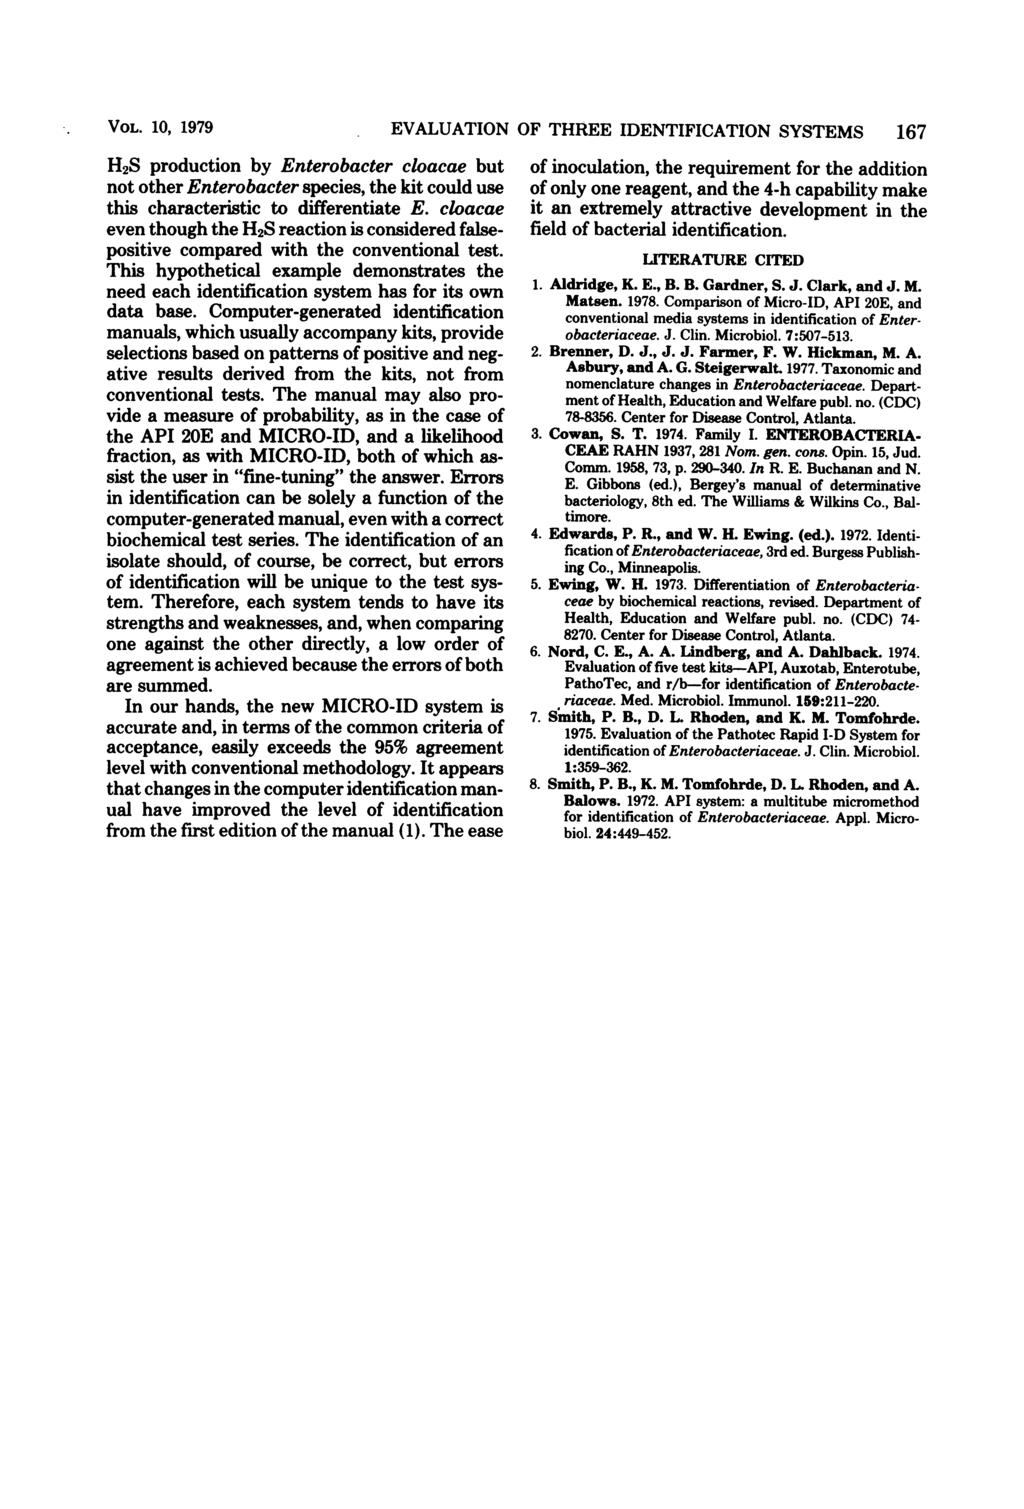 VOL. 1, 1979 H2S production by Enterobacter cloacae but not other Enterobacter species, the kit could use this characteristic to differentiate E.